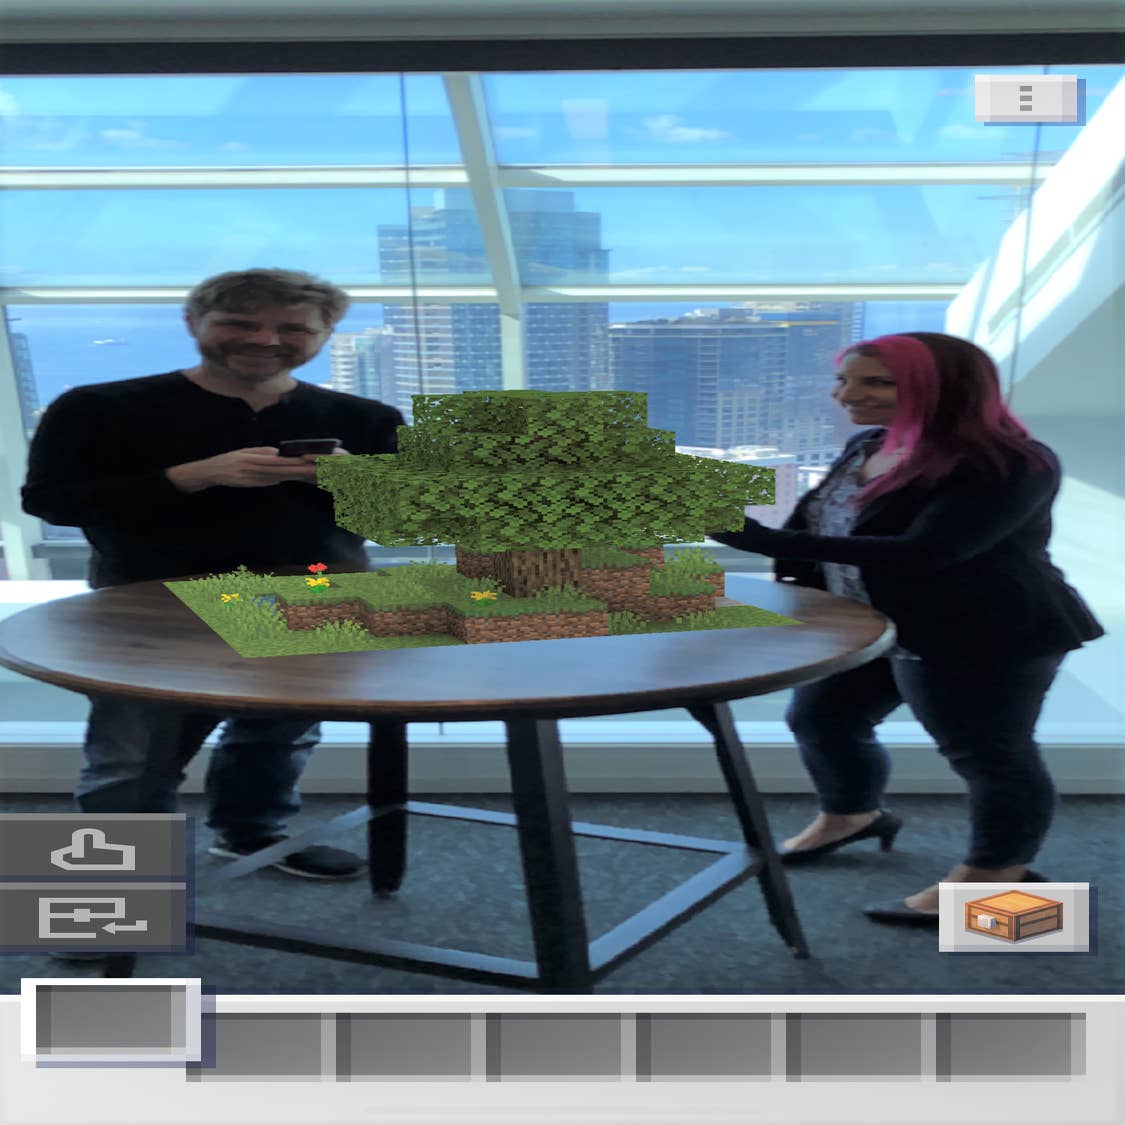 minecraft earth uses augmented reality to let players build in the